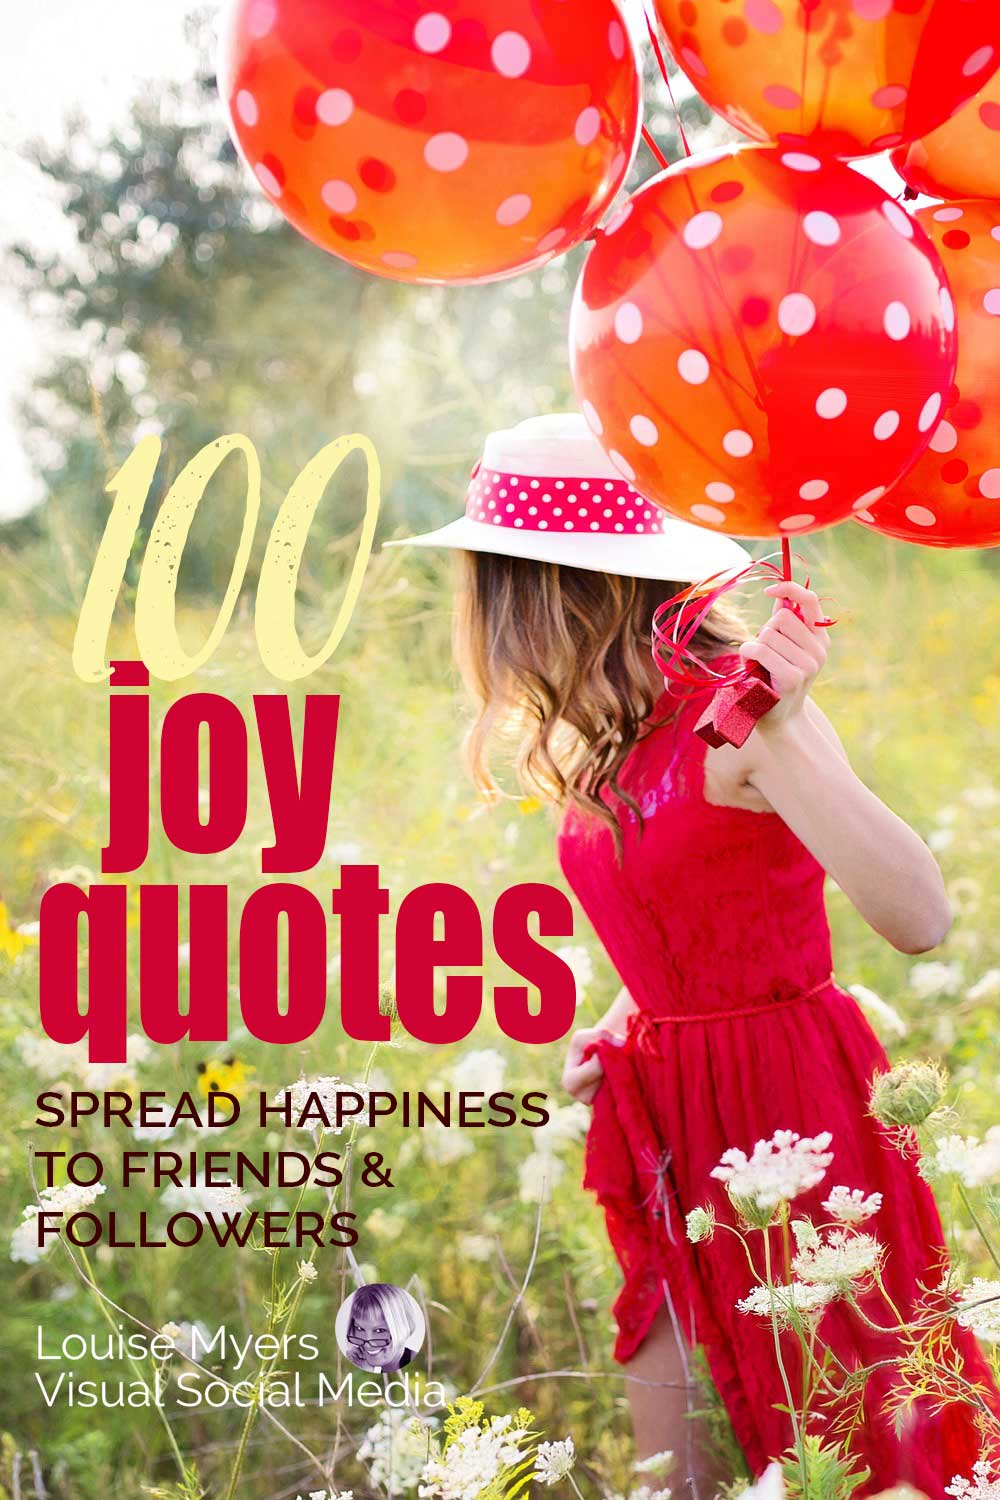 woman in red dress walking through flower field with red balloons has text, 100 joy quotes.